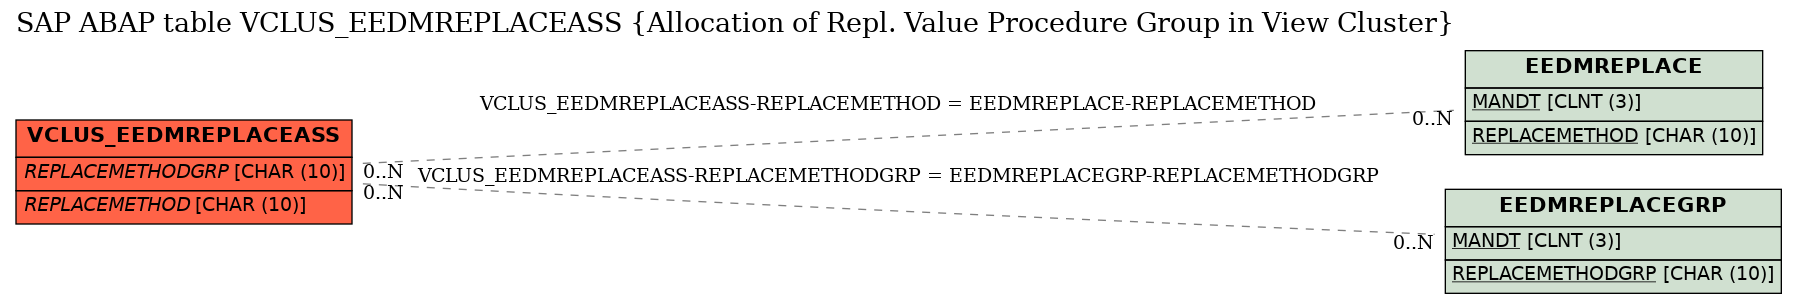 E-R Diagram for table VCLUS_EEDMREPLACEASS (Allocation of Repl. Value Procedure Group in View Cluster)